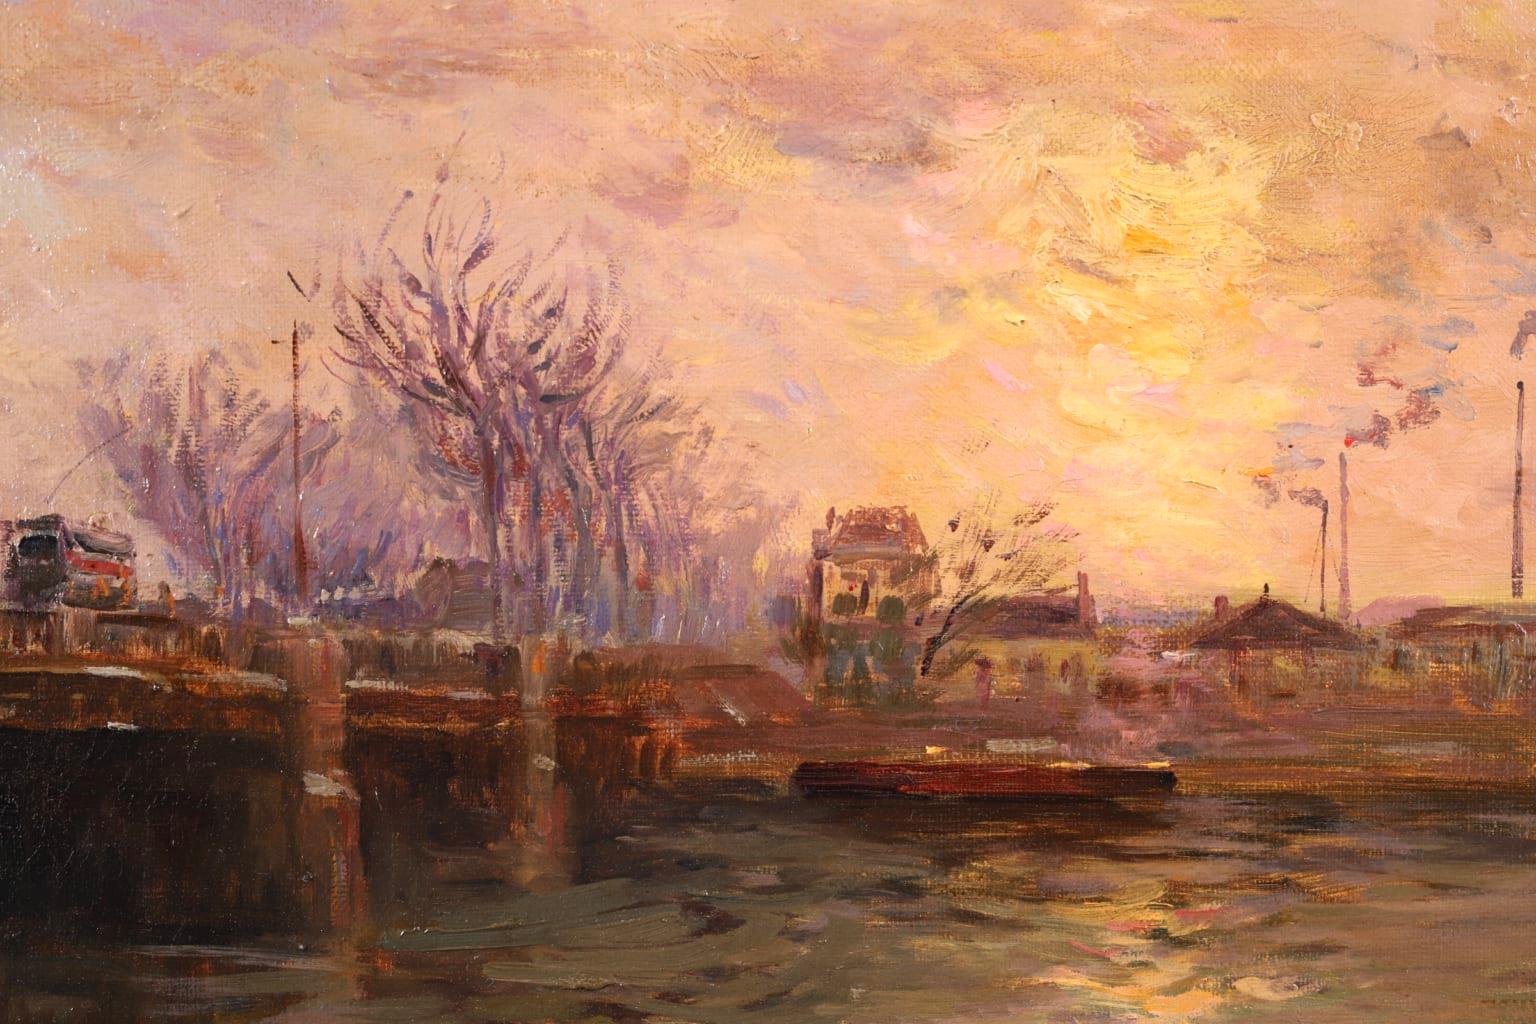 Sunset on the River Seine - Impressionist Oil, Riverscape by Elie Anatole Pavil 3